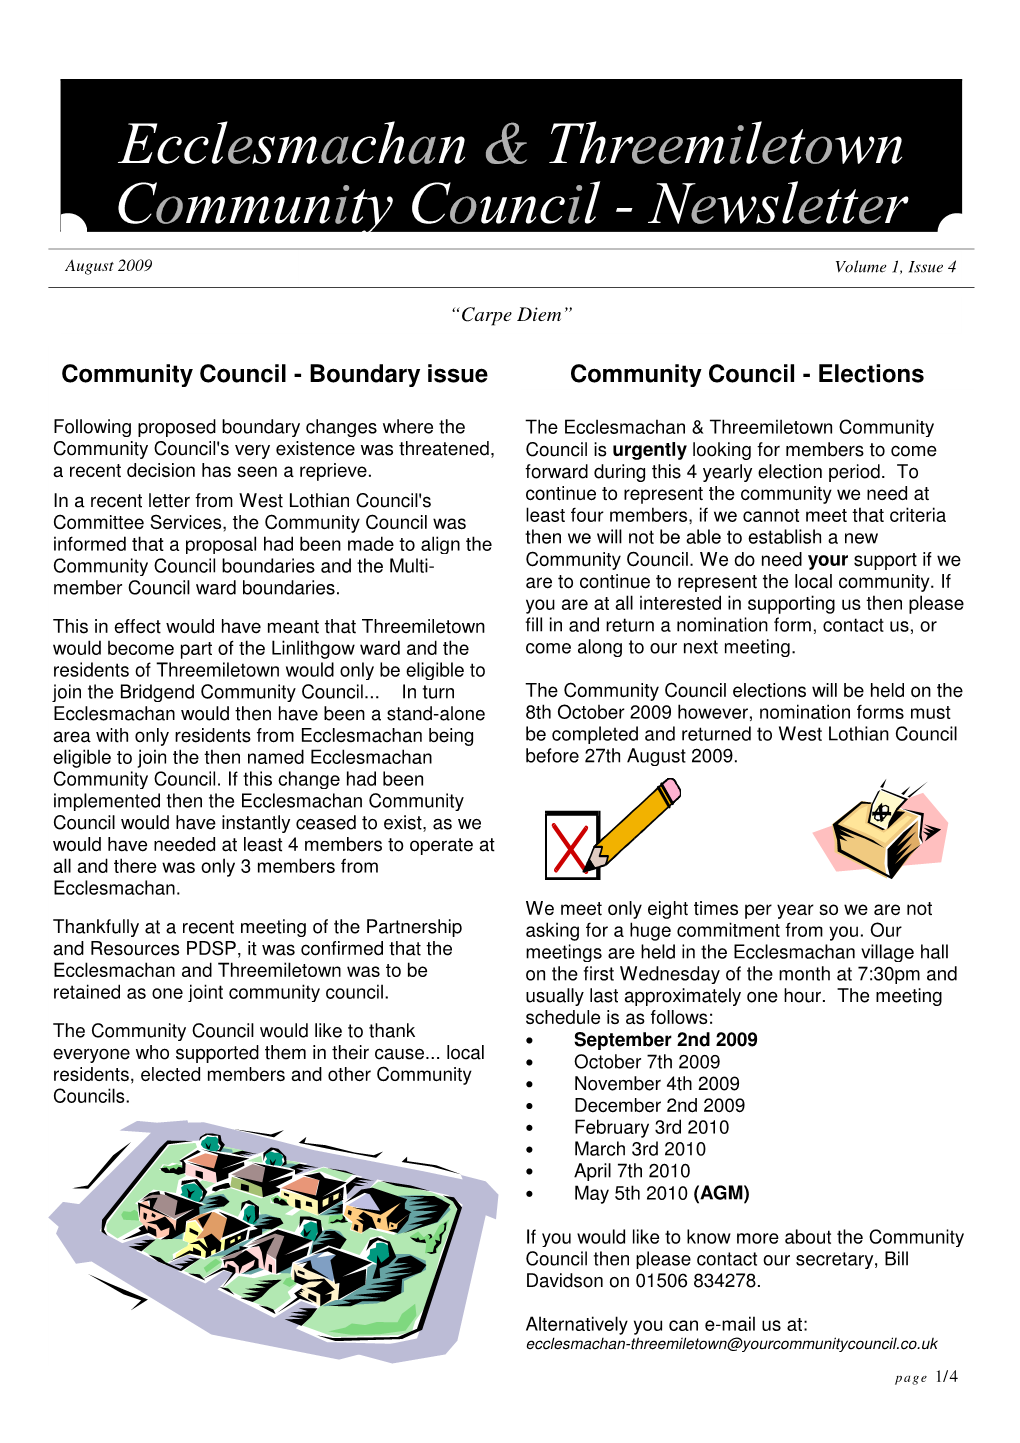 Boundary Issue Community Council - Elections